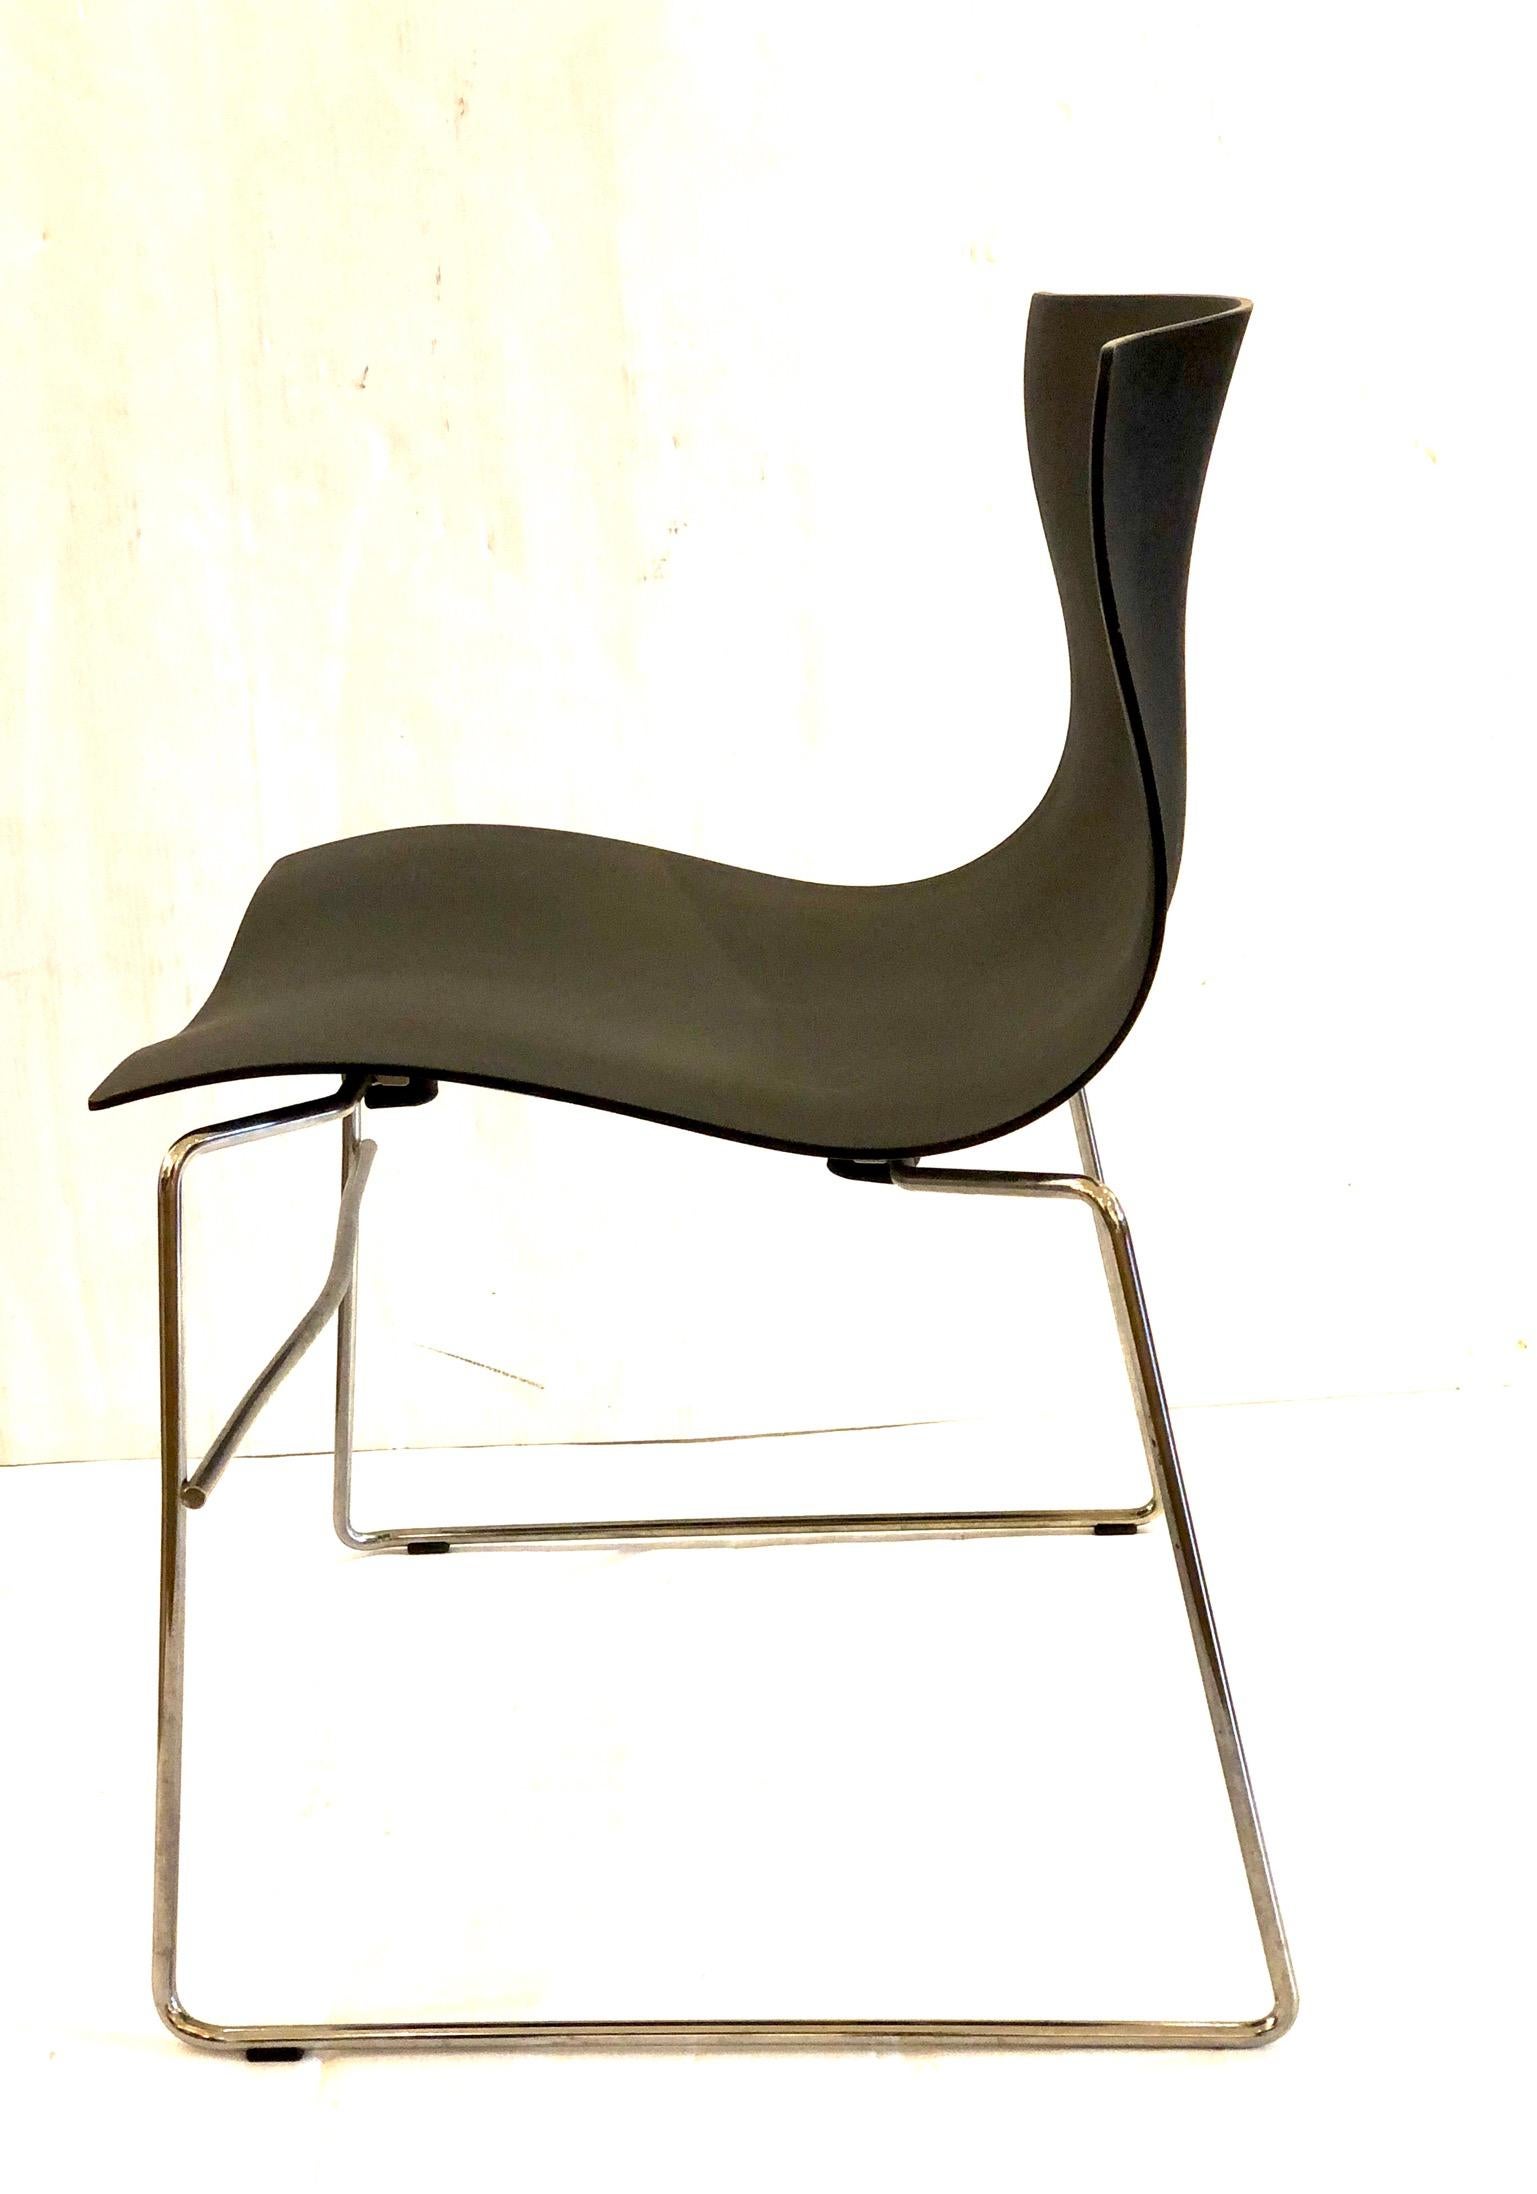 Post-Modern Set of 4 Handkerchief Chairs in Black & Chrome Designed by Vignelli for Knoll